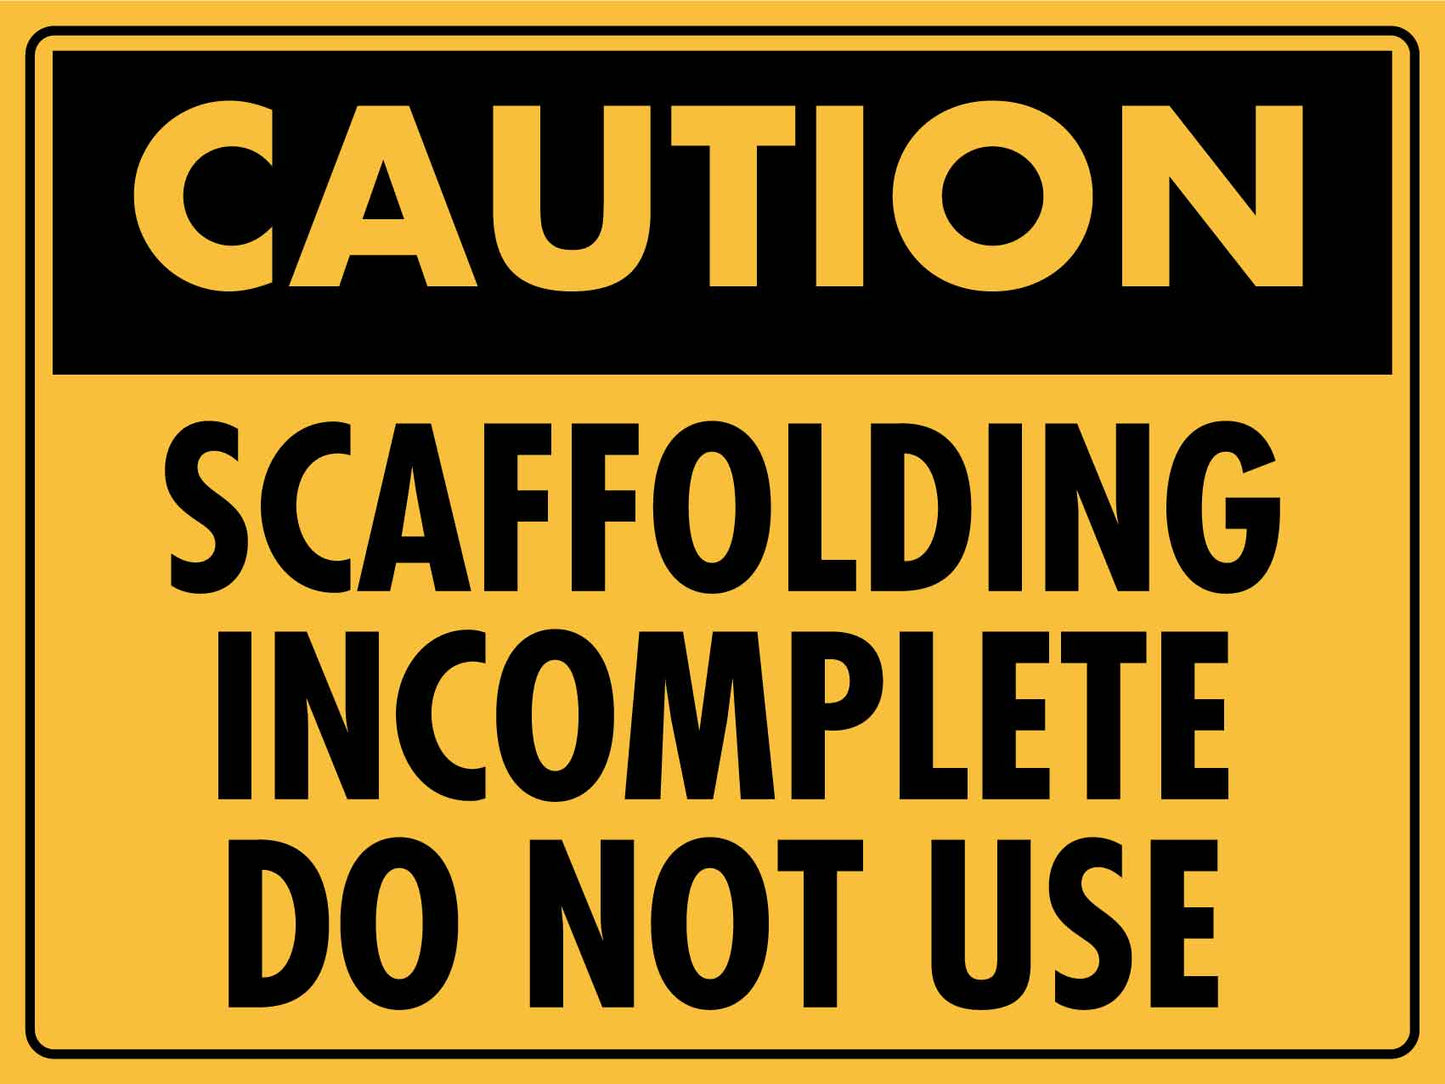 Caution Scaffolding Incomplete Do Not Use Sign